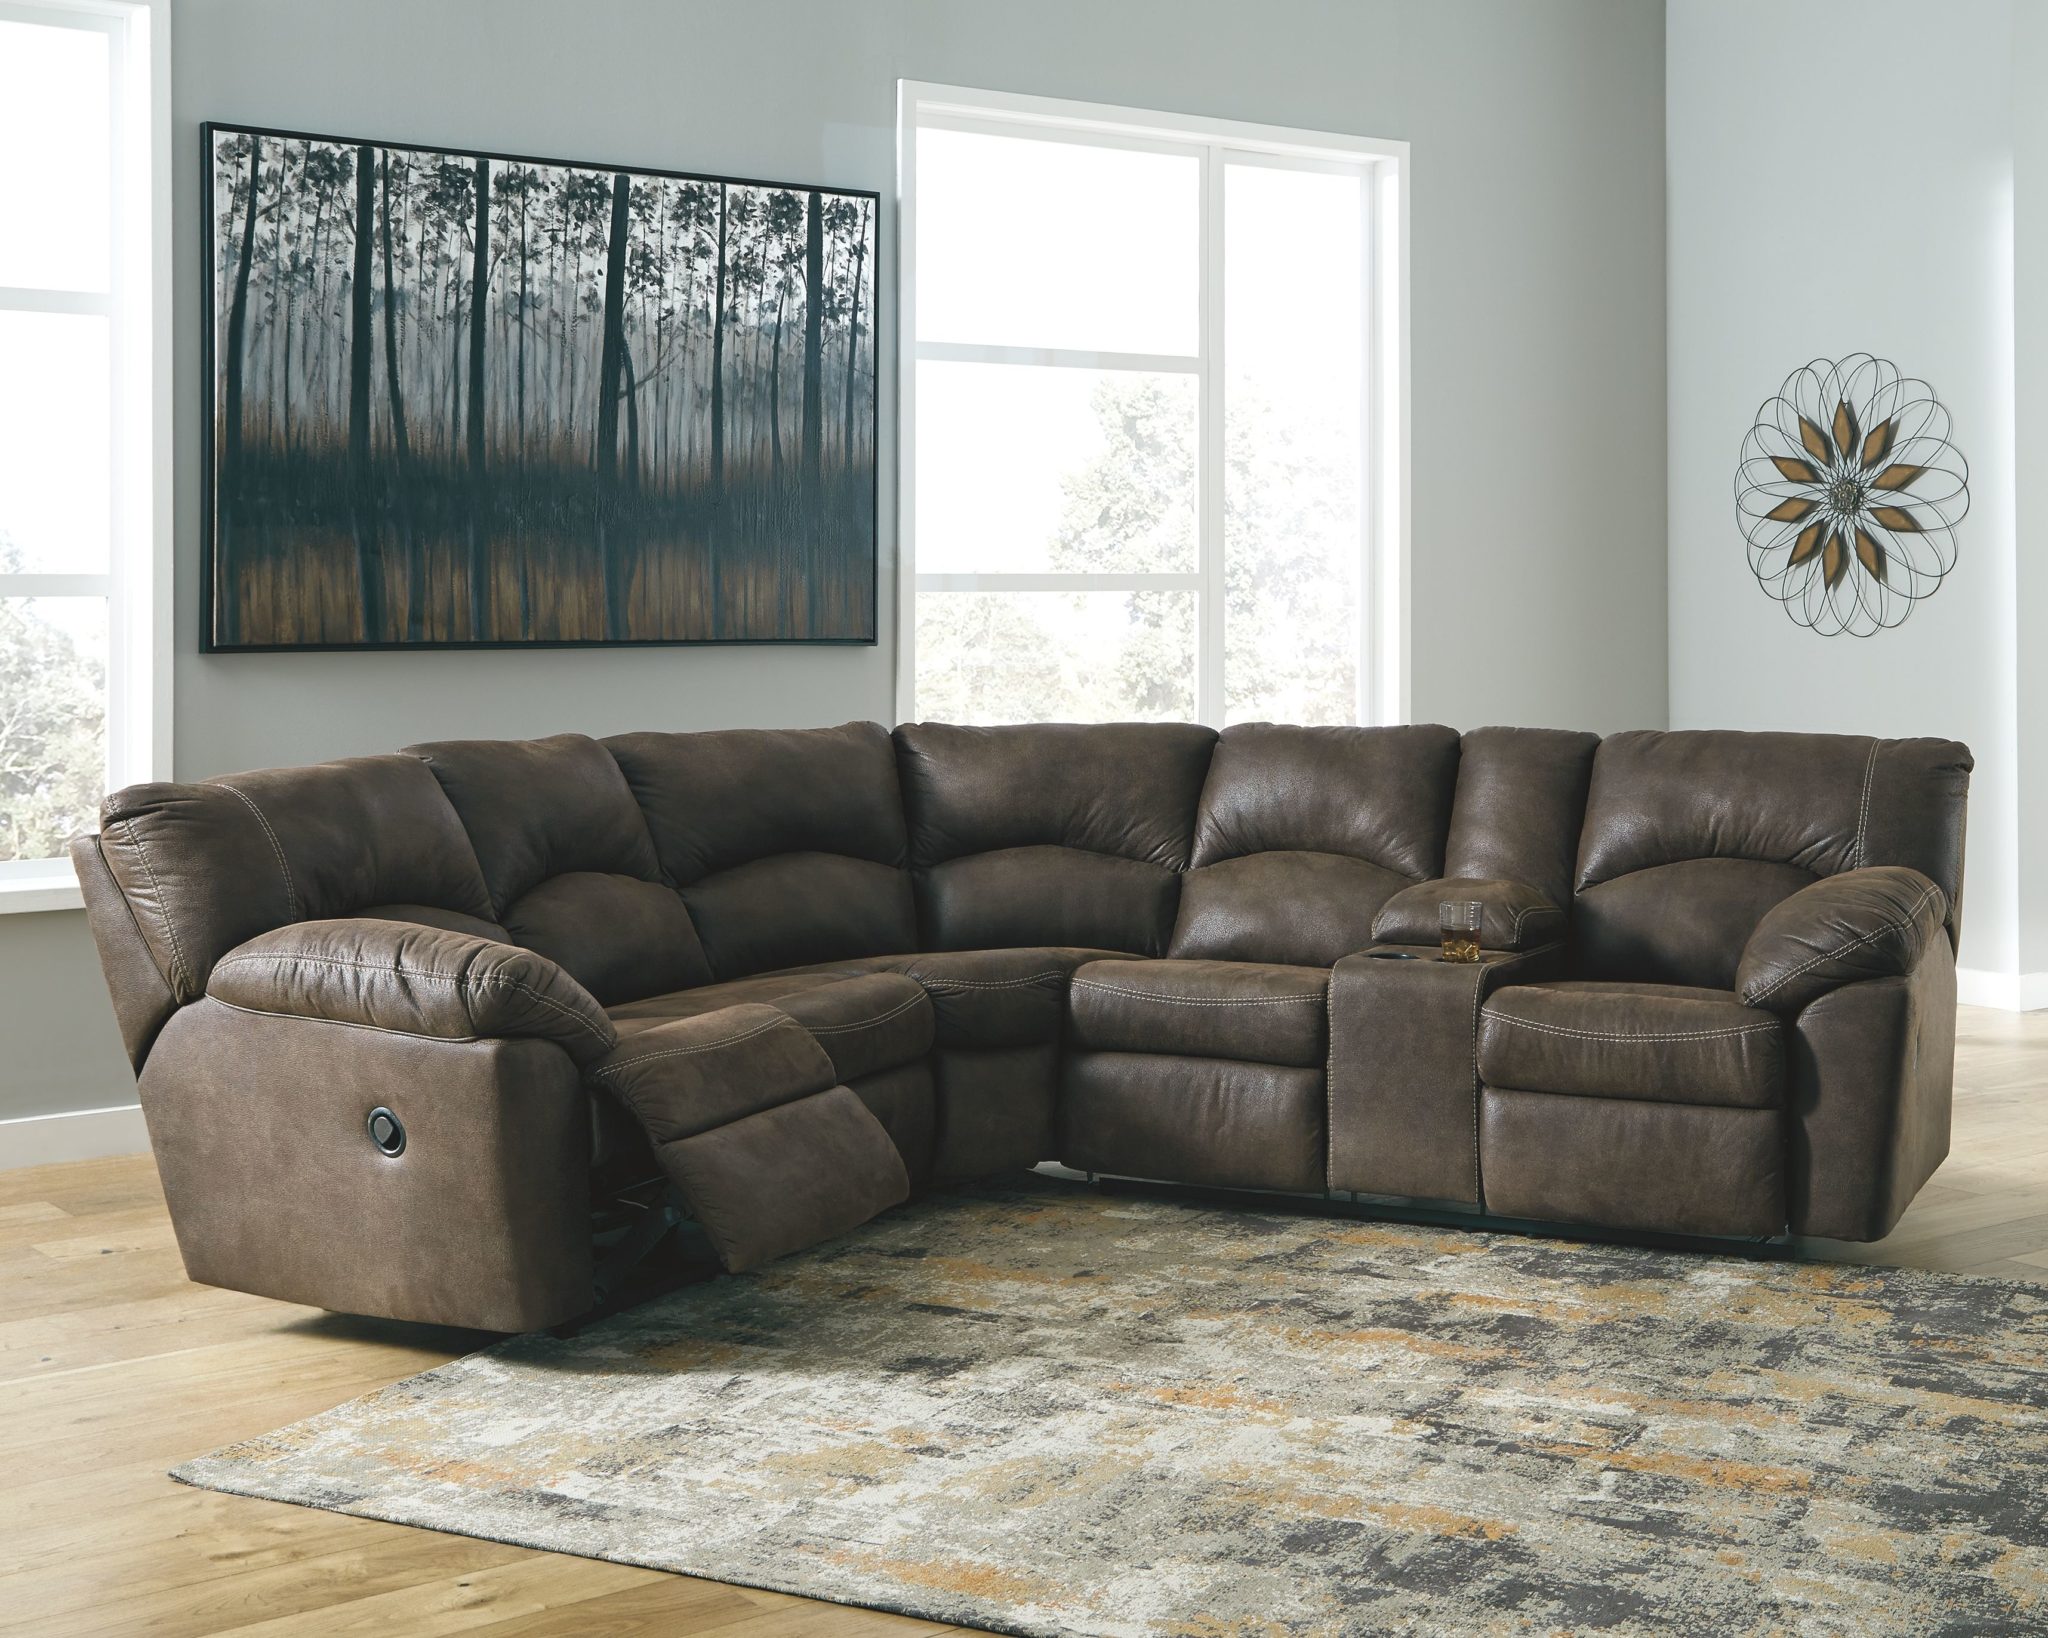 Benchcraft Part 146091 Tambo Canyon Living Room Furniture